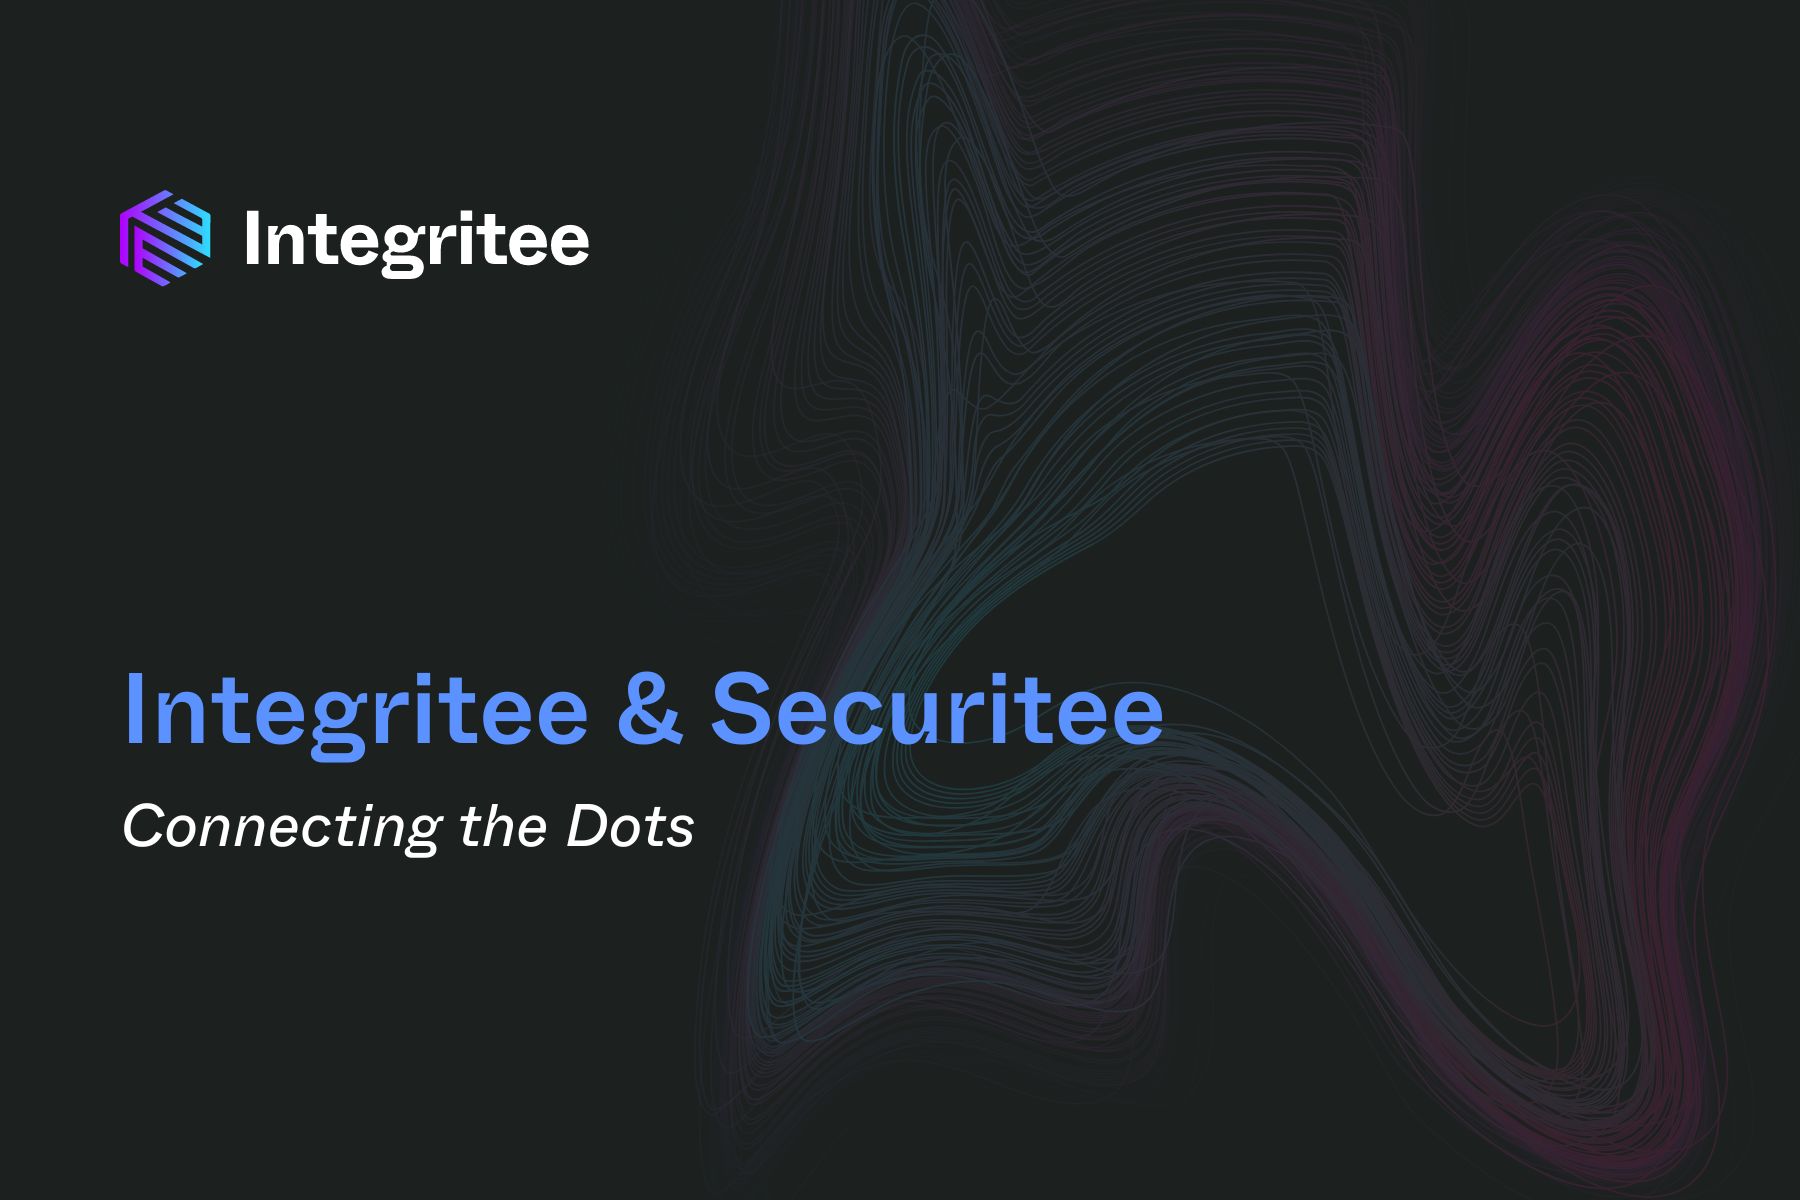 Integritee & Securitee: Connecting the Dots